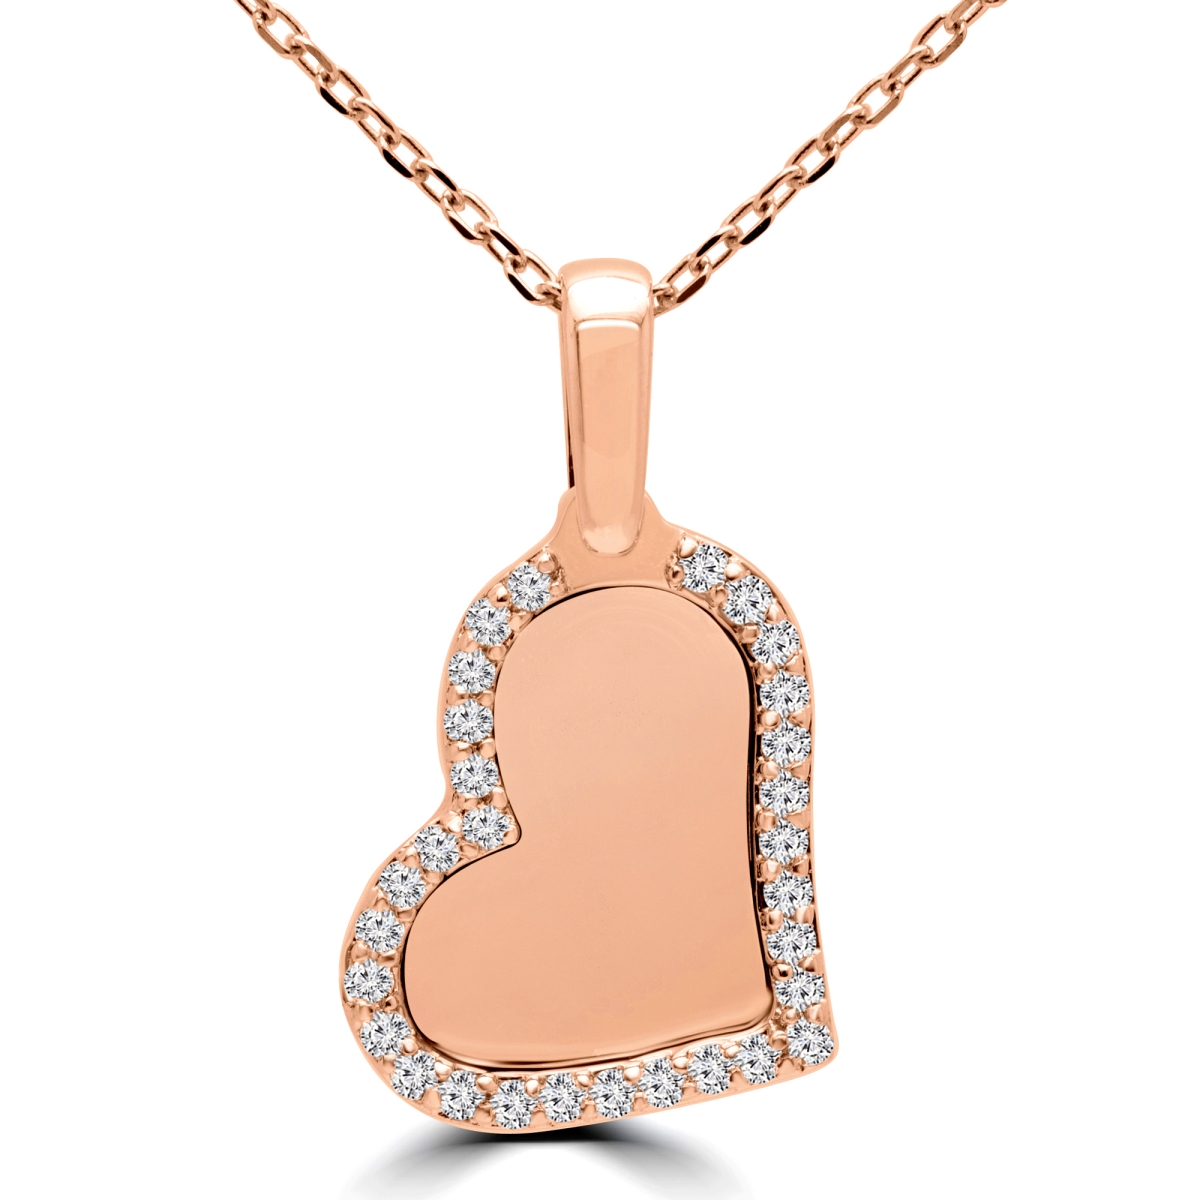 Mdr170154 0.14 Ctw Round Diamond Heart Pendant Necklace In 14k